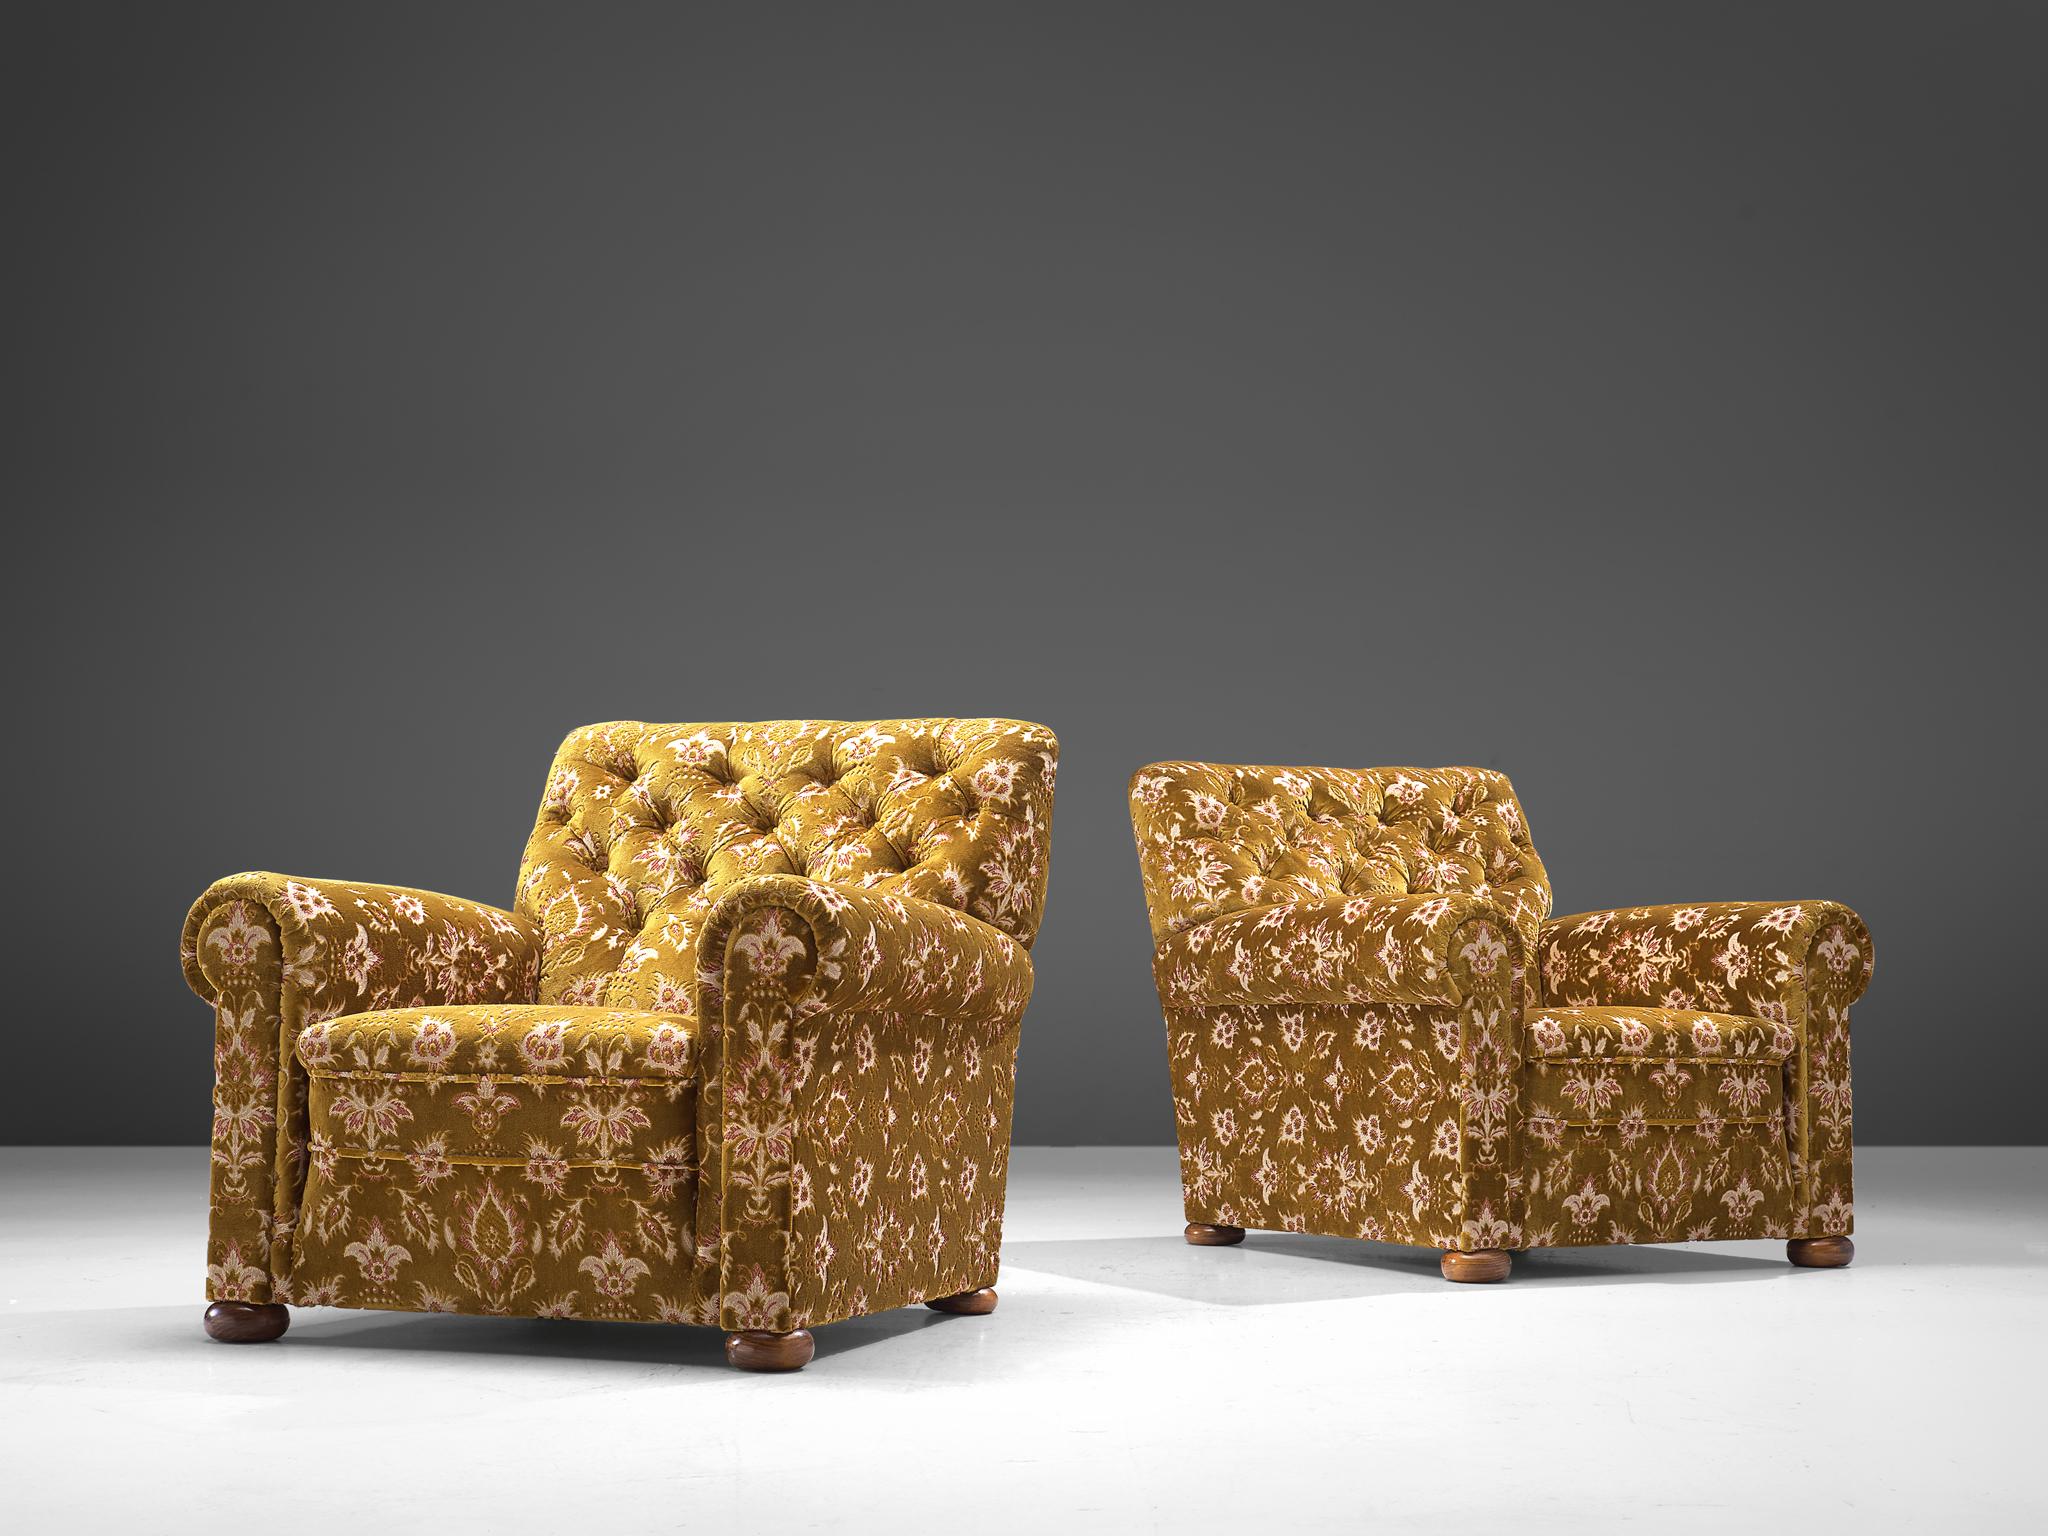 Lounge chairs, fabric and oak, Italy, 1940s.

Italian Art Deco set of armchairs with tufted backrests. These chairs have a certain grace and luxury thanks to the rectangular shaped backrest with tufting. The chairs feature a very deep seat and